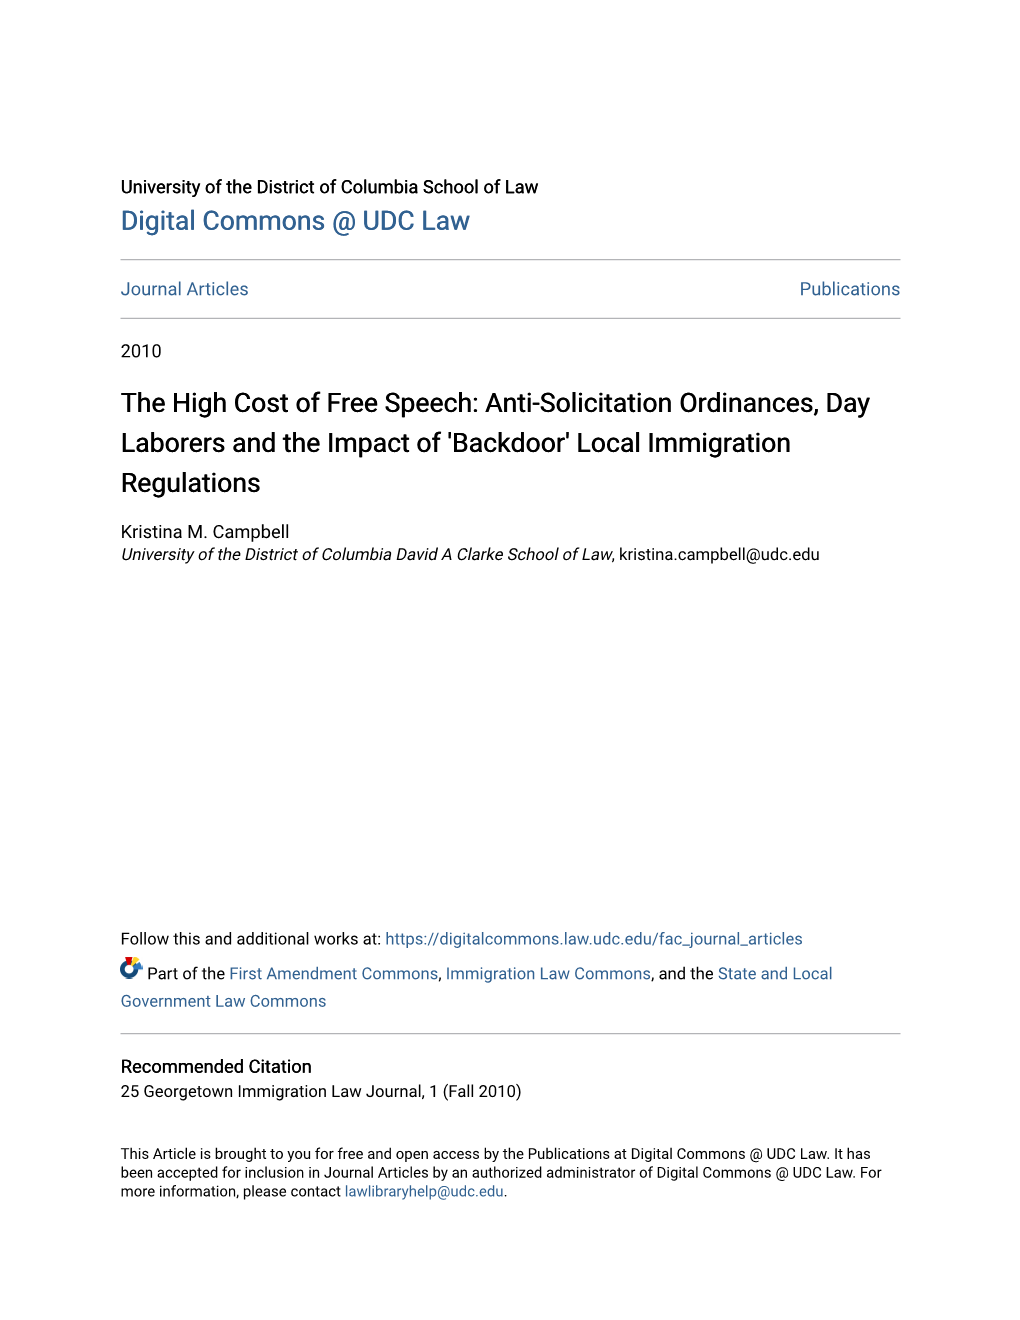 The High Cost of Free Speech: Anti-Solicitation Ordinances, Day Laborers and the Impact of 'Backdoor' Local Immigration Regulations